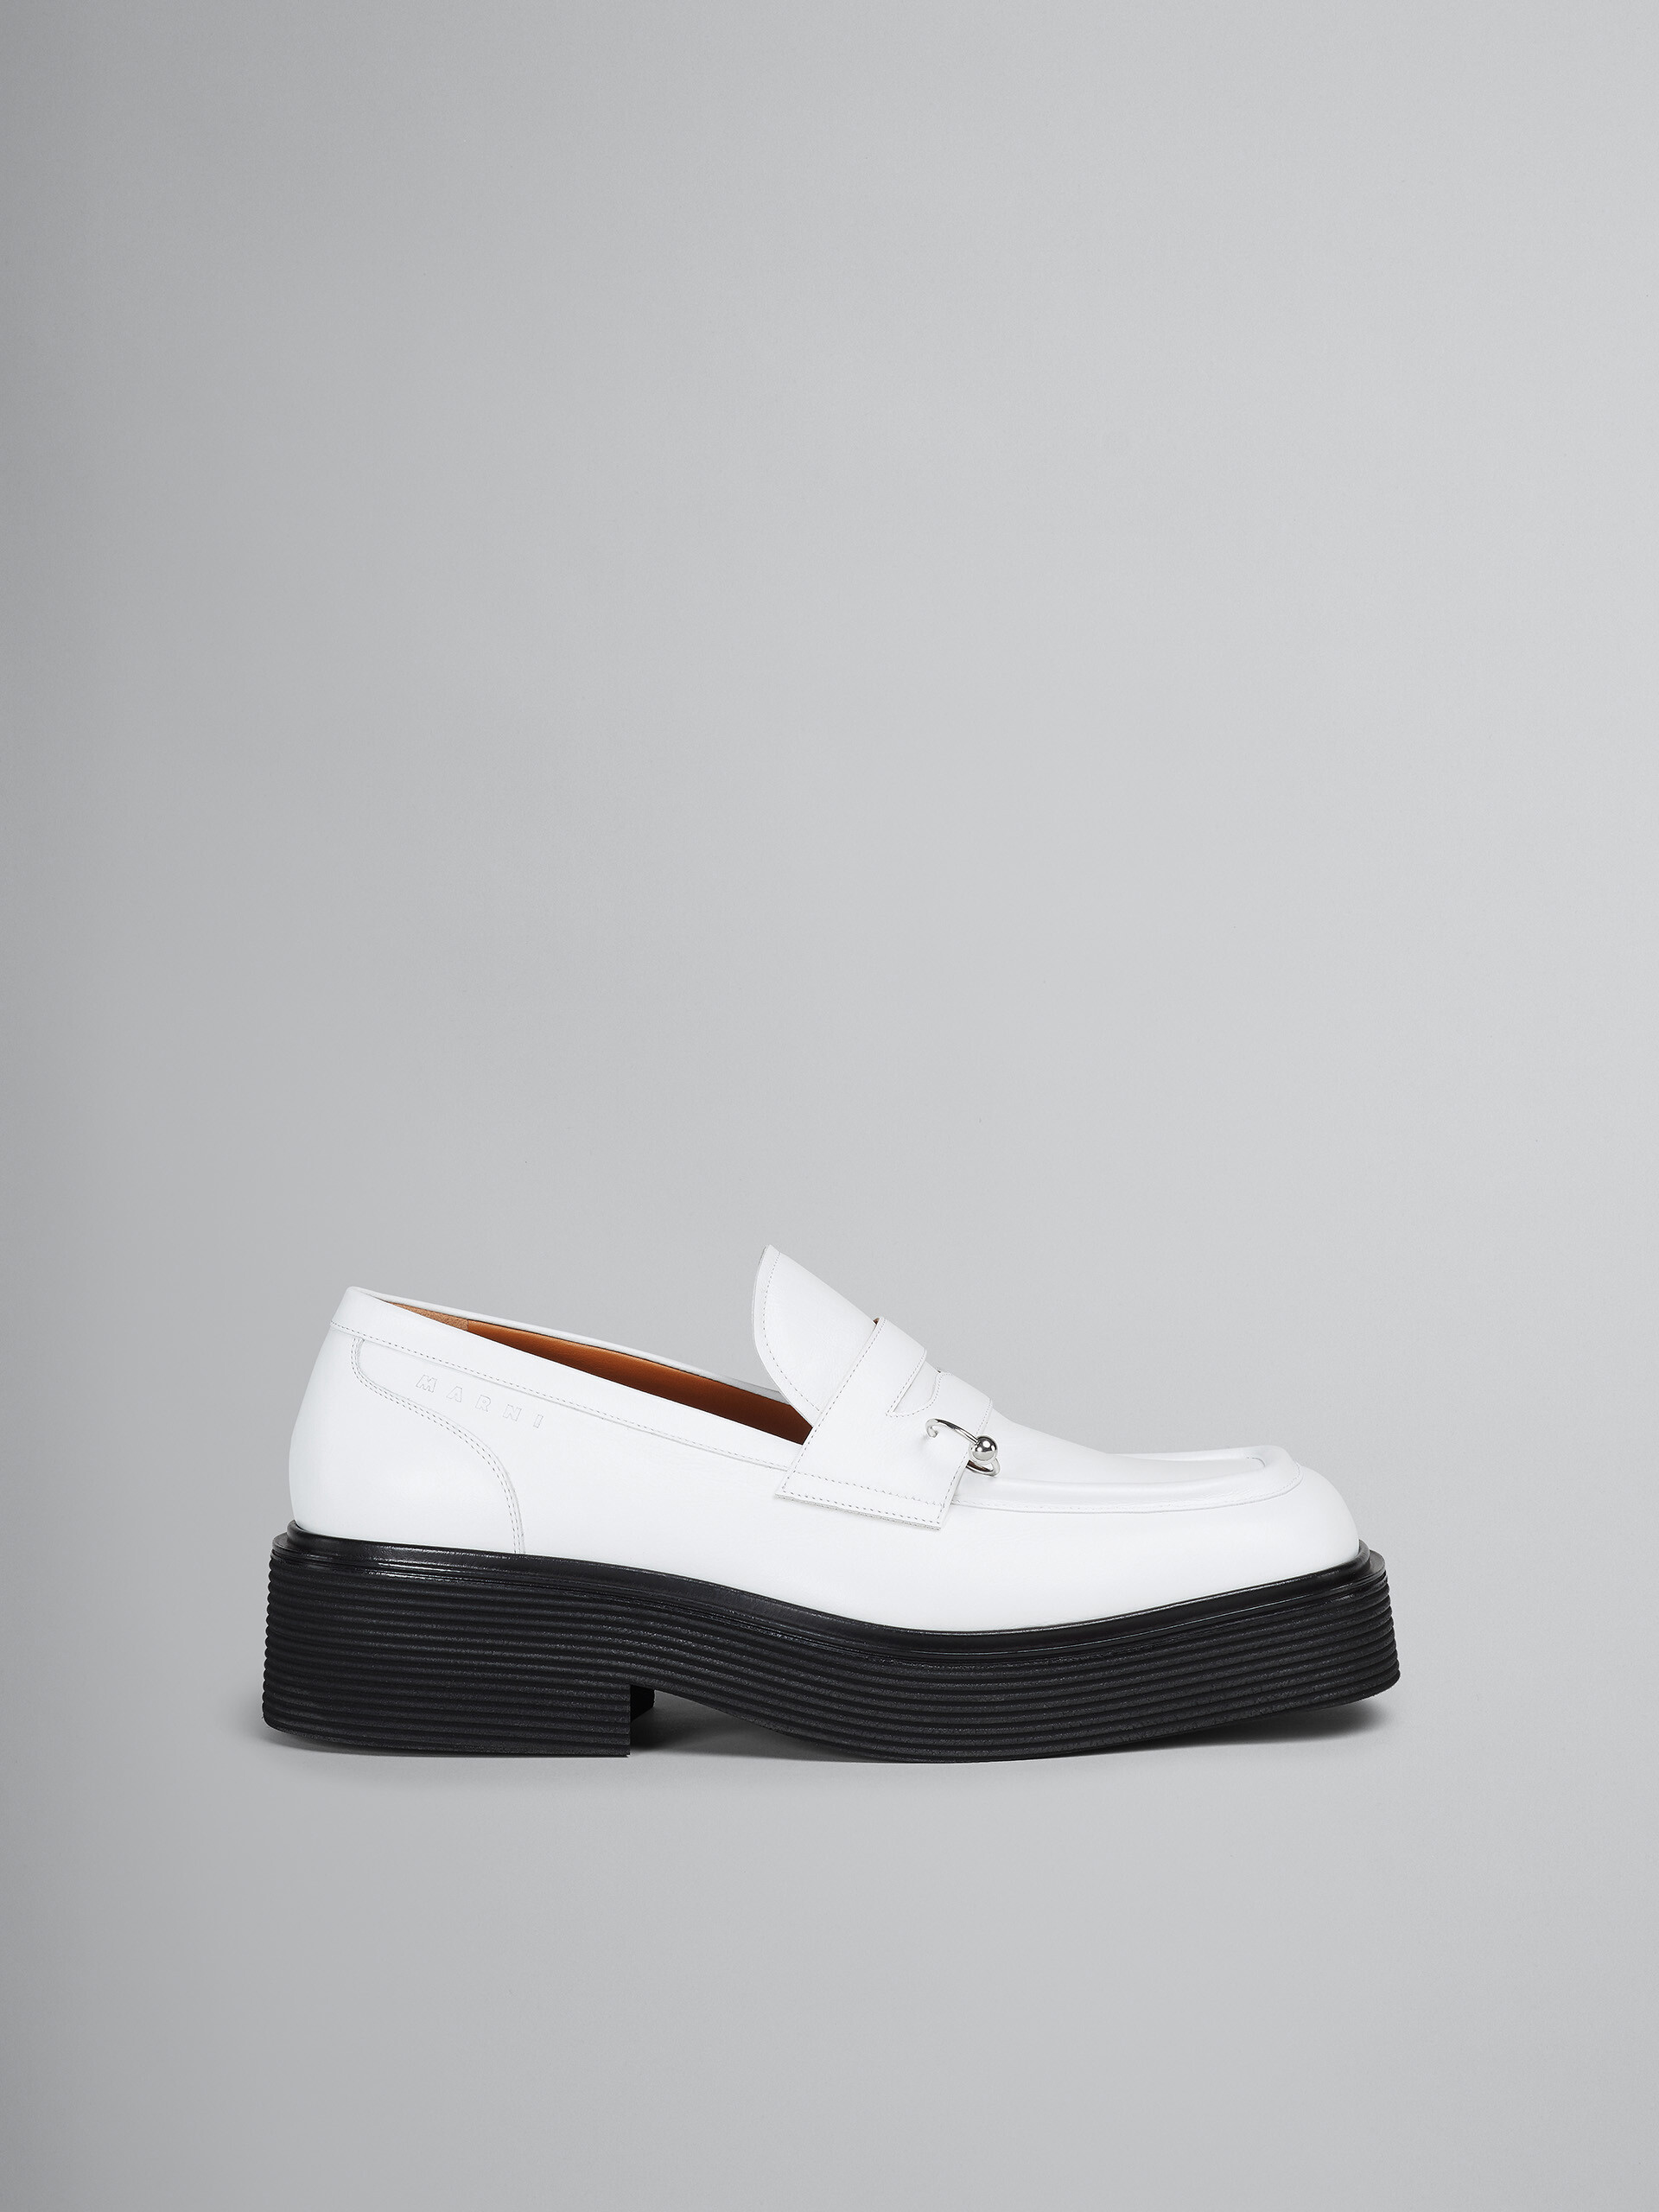 White leather moccasin - Mocassin - Image 1